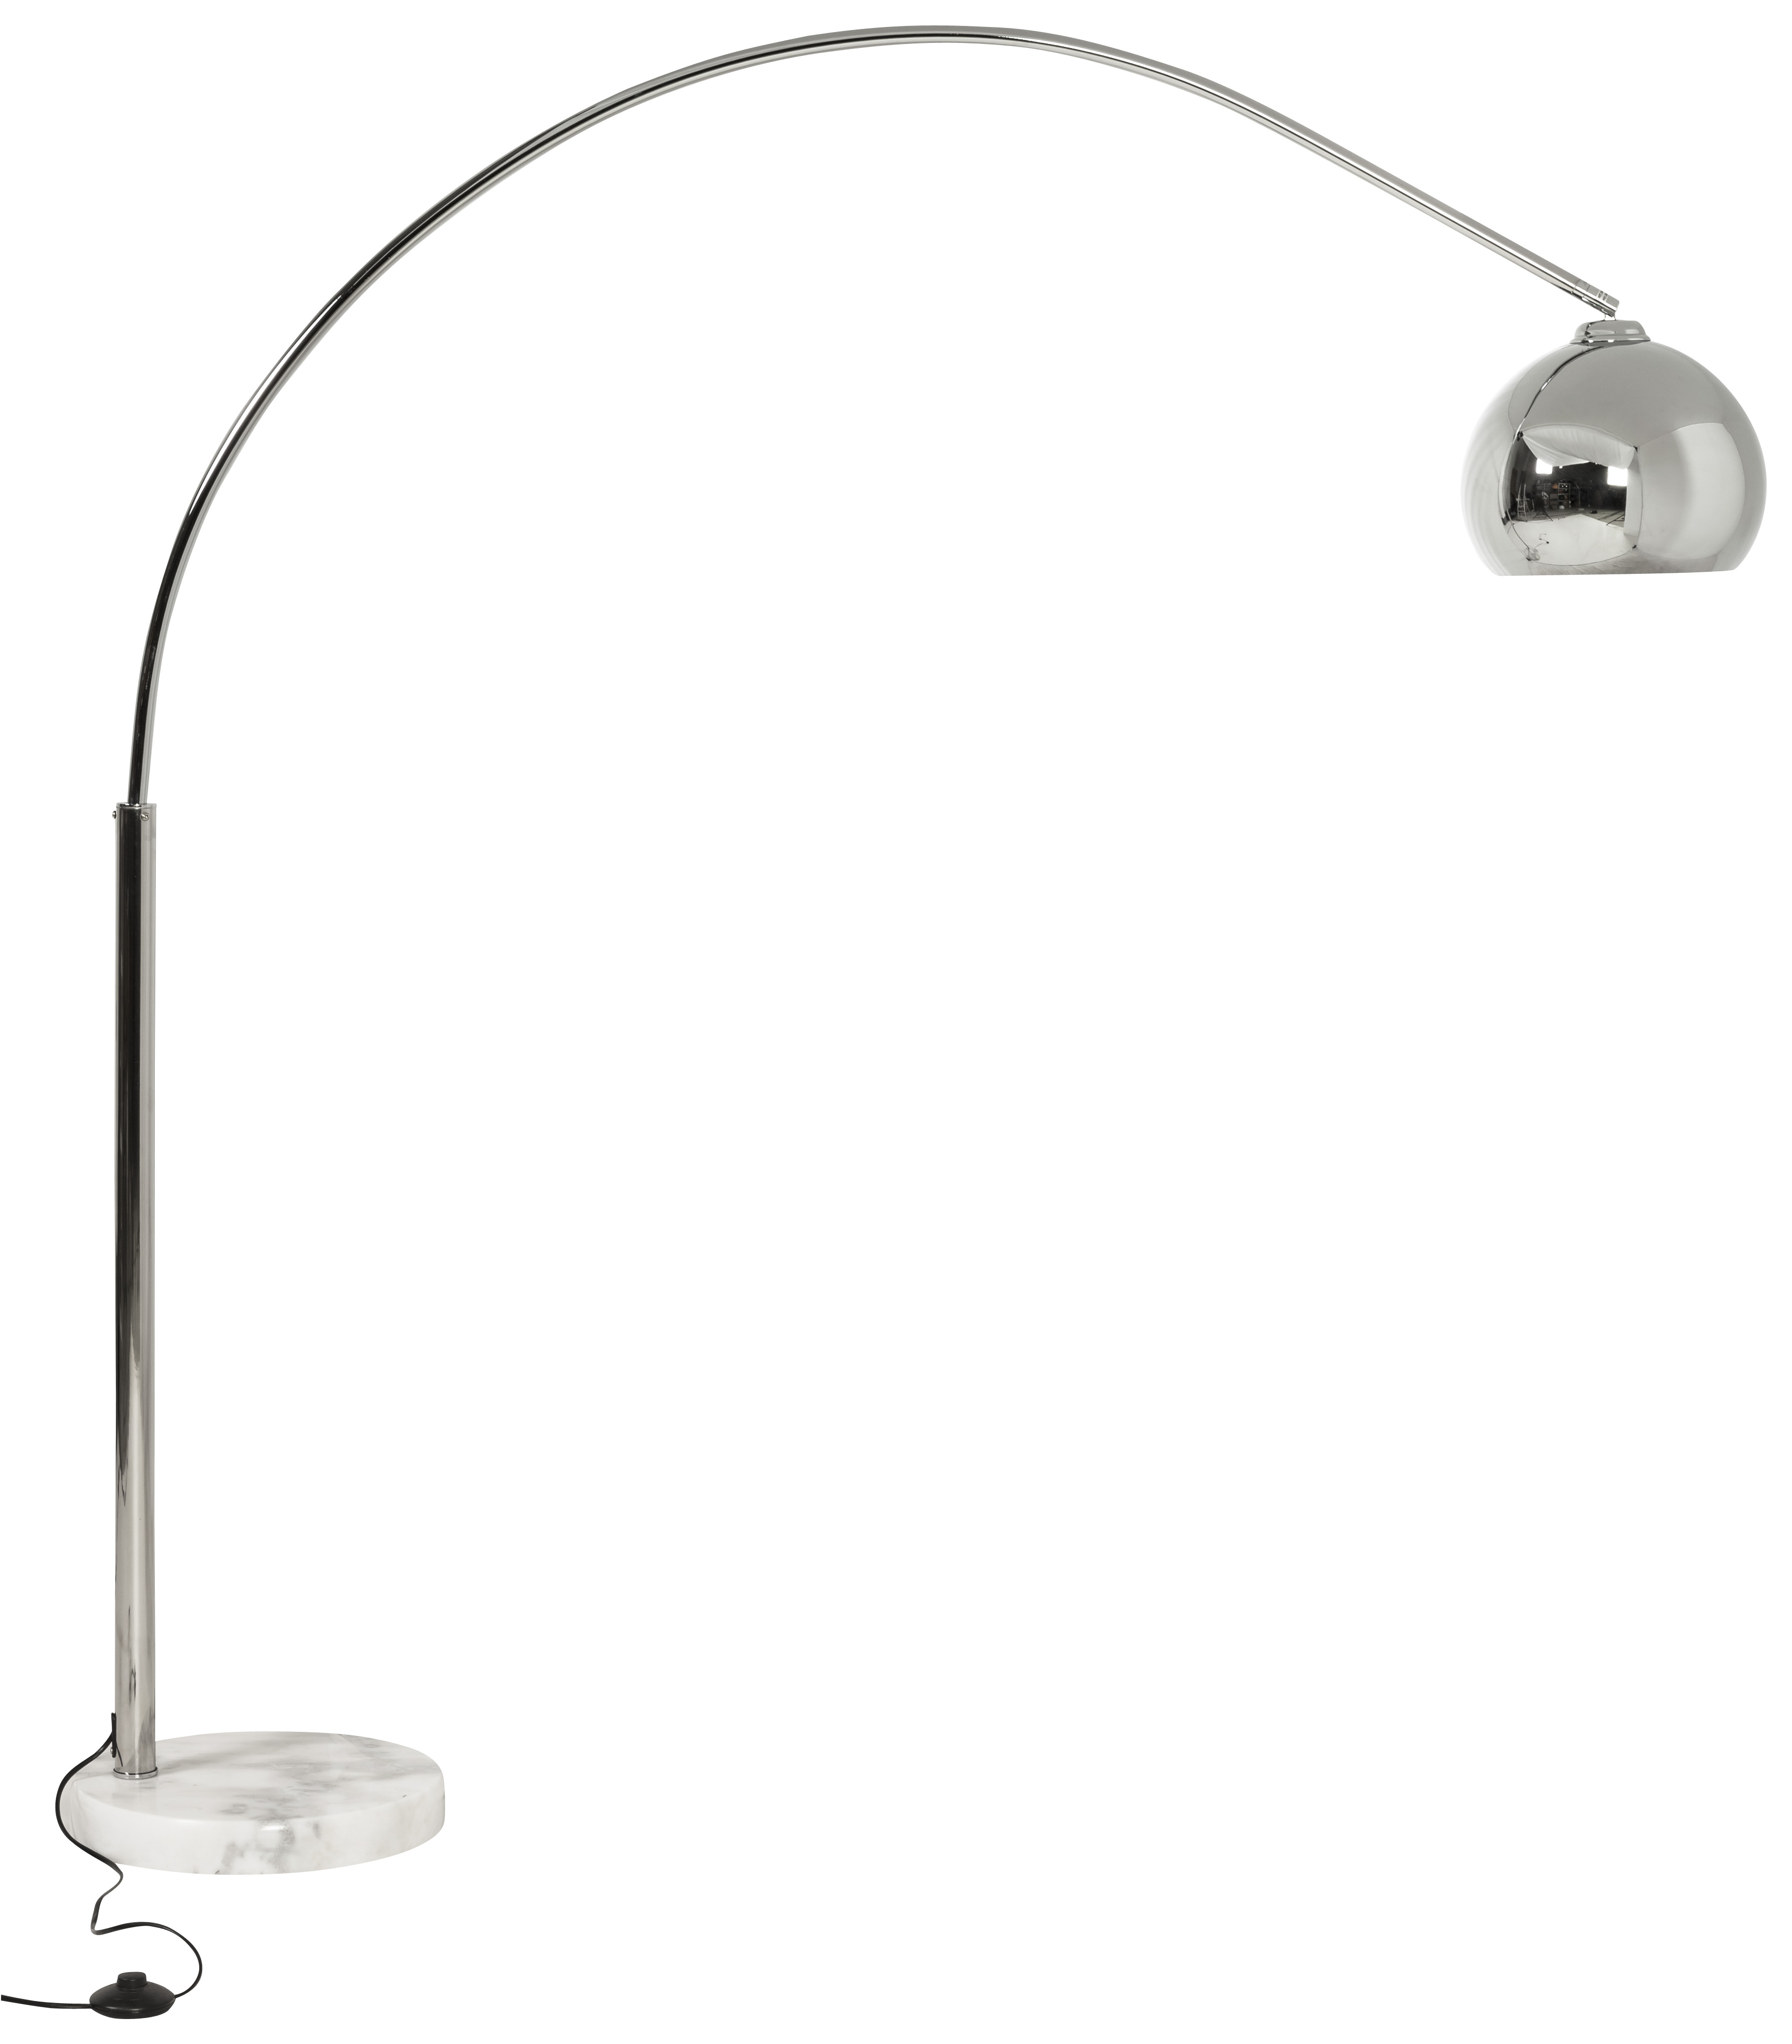 Amazing Floor Standing Reading Lamp Chrome Adjustable W O in sizing 3589 X 4093